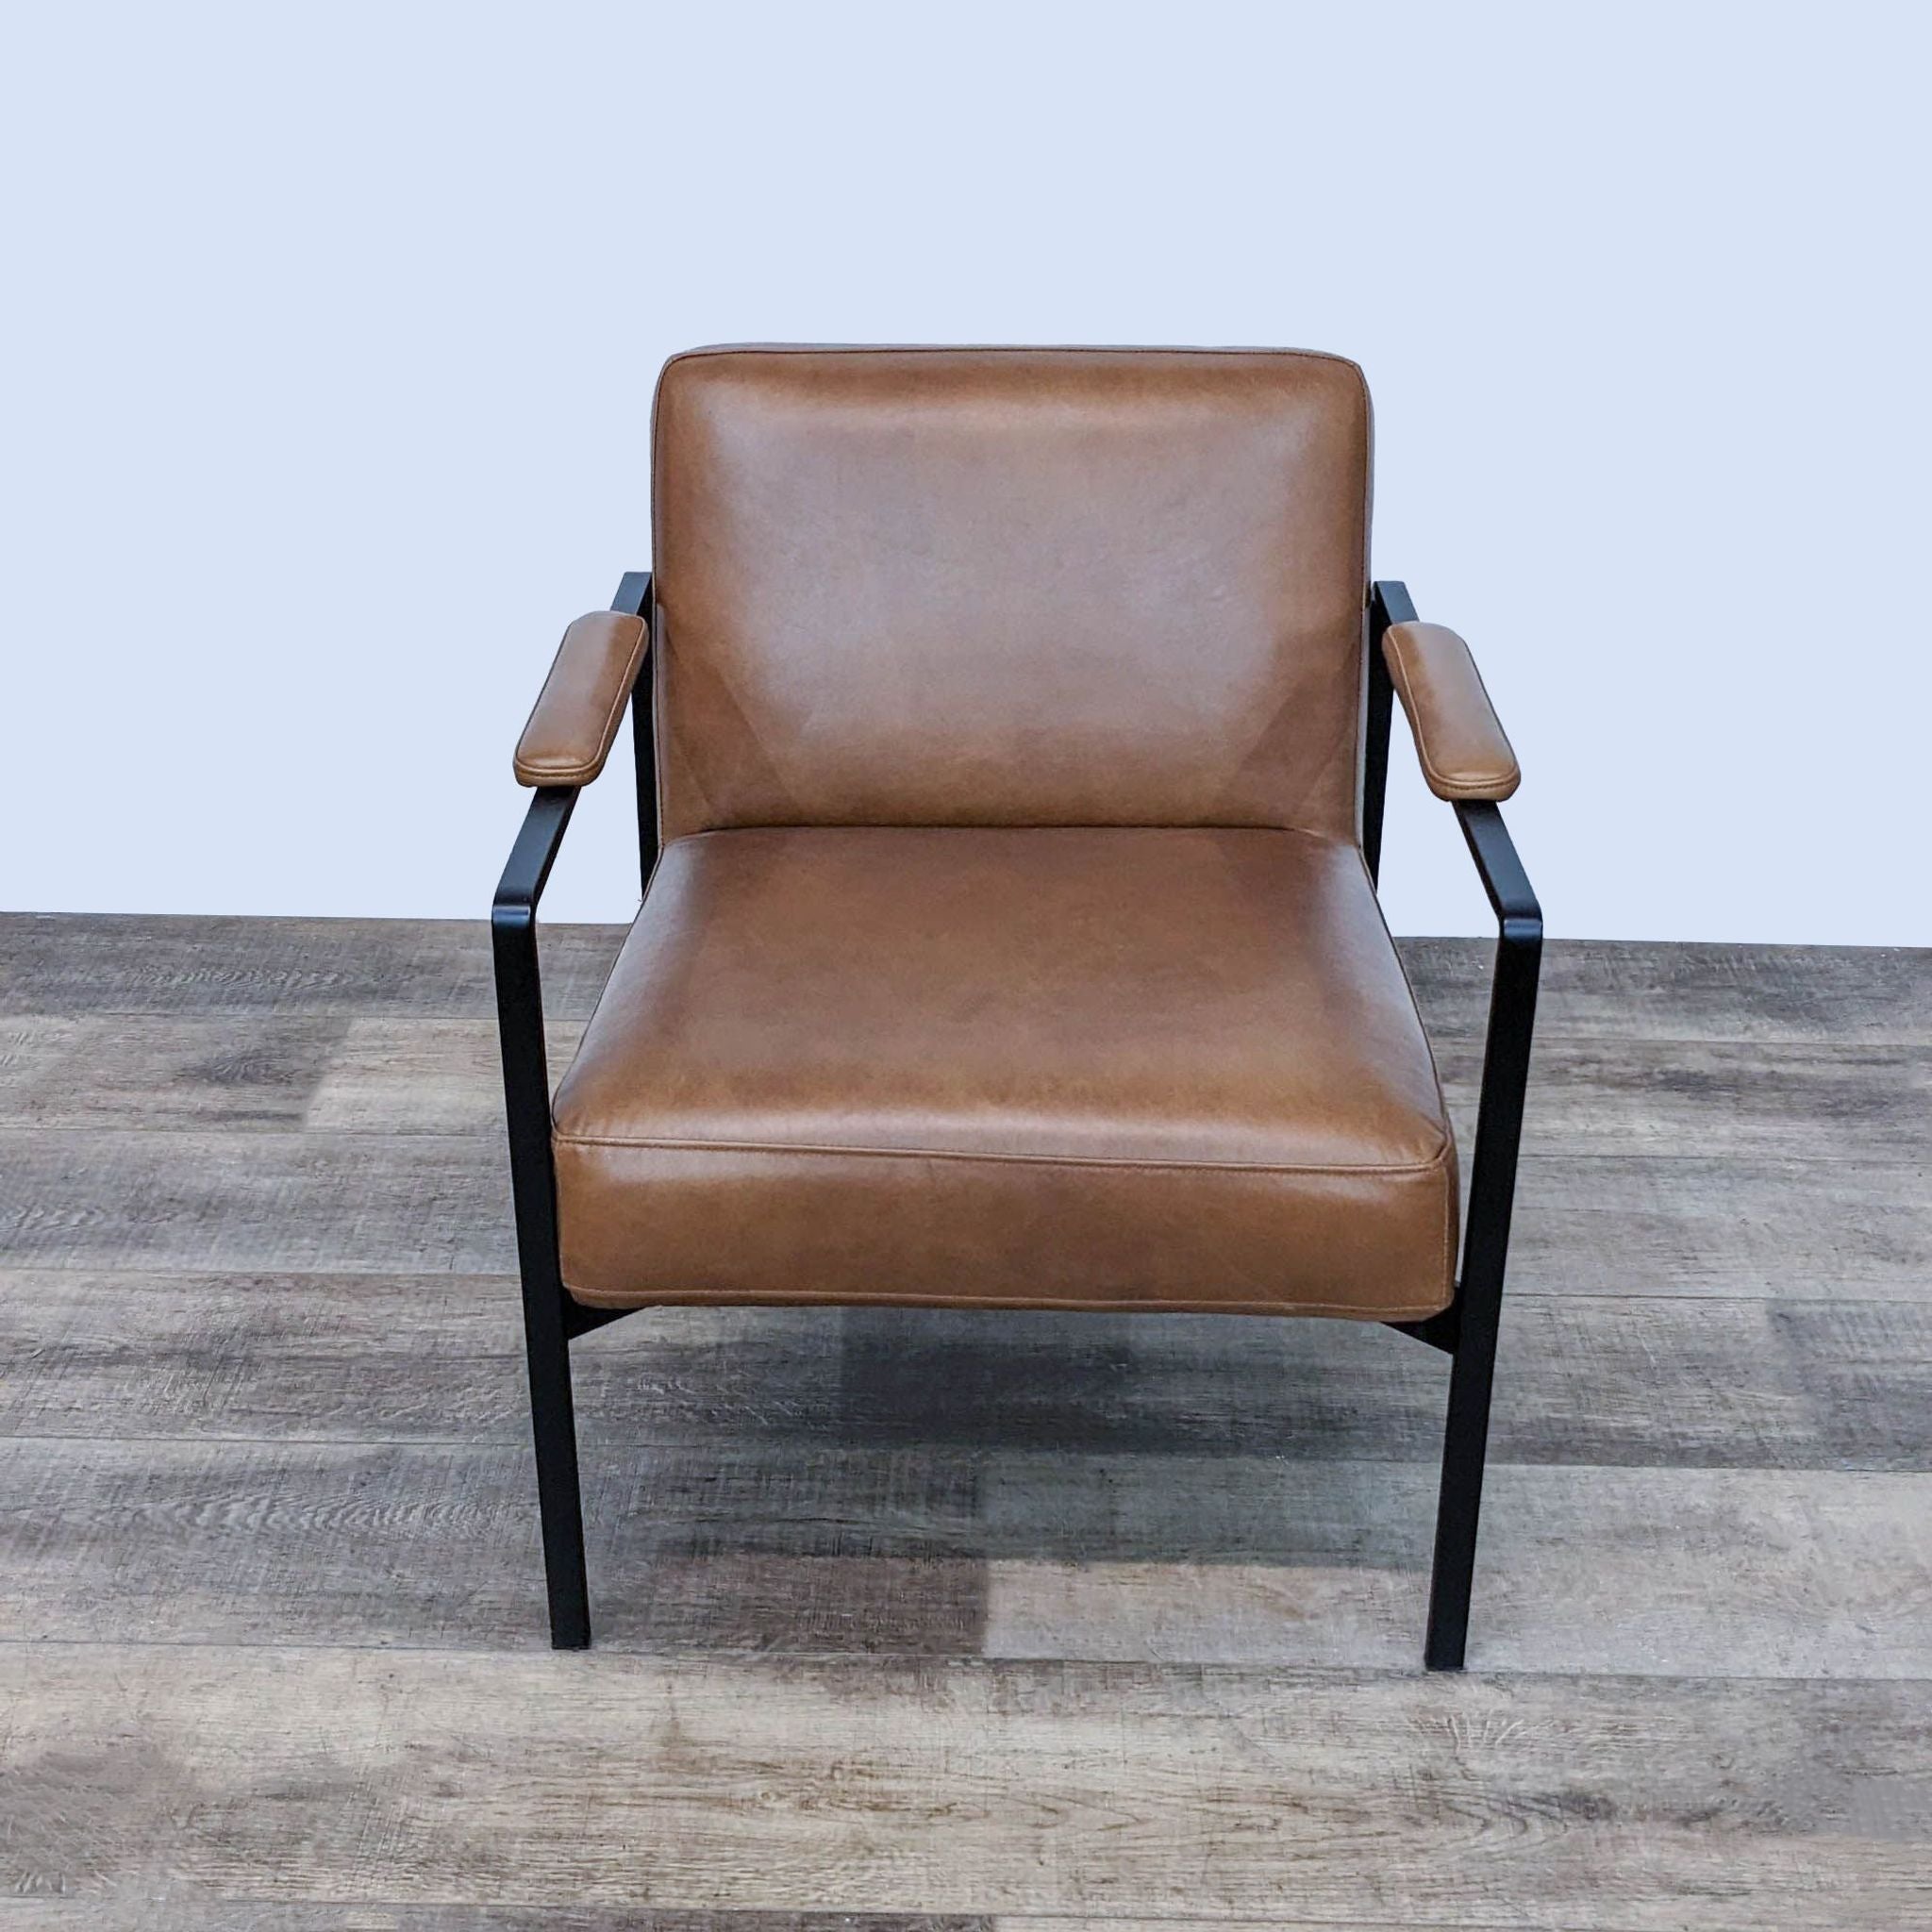 Elegant West Elm Highline lounge chair featuring cushioned leather upholstery and a sculptural steel frame, FSC-certified durable wood.